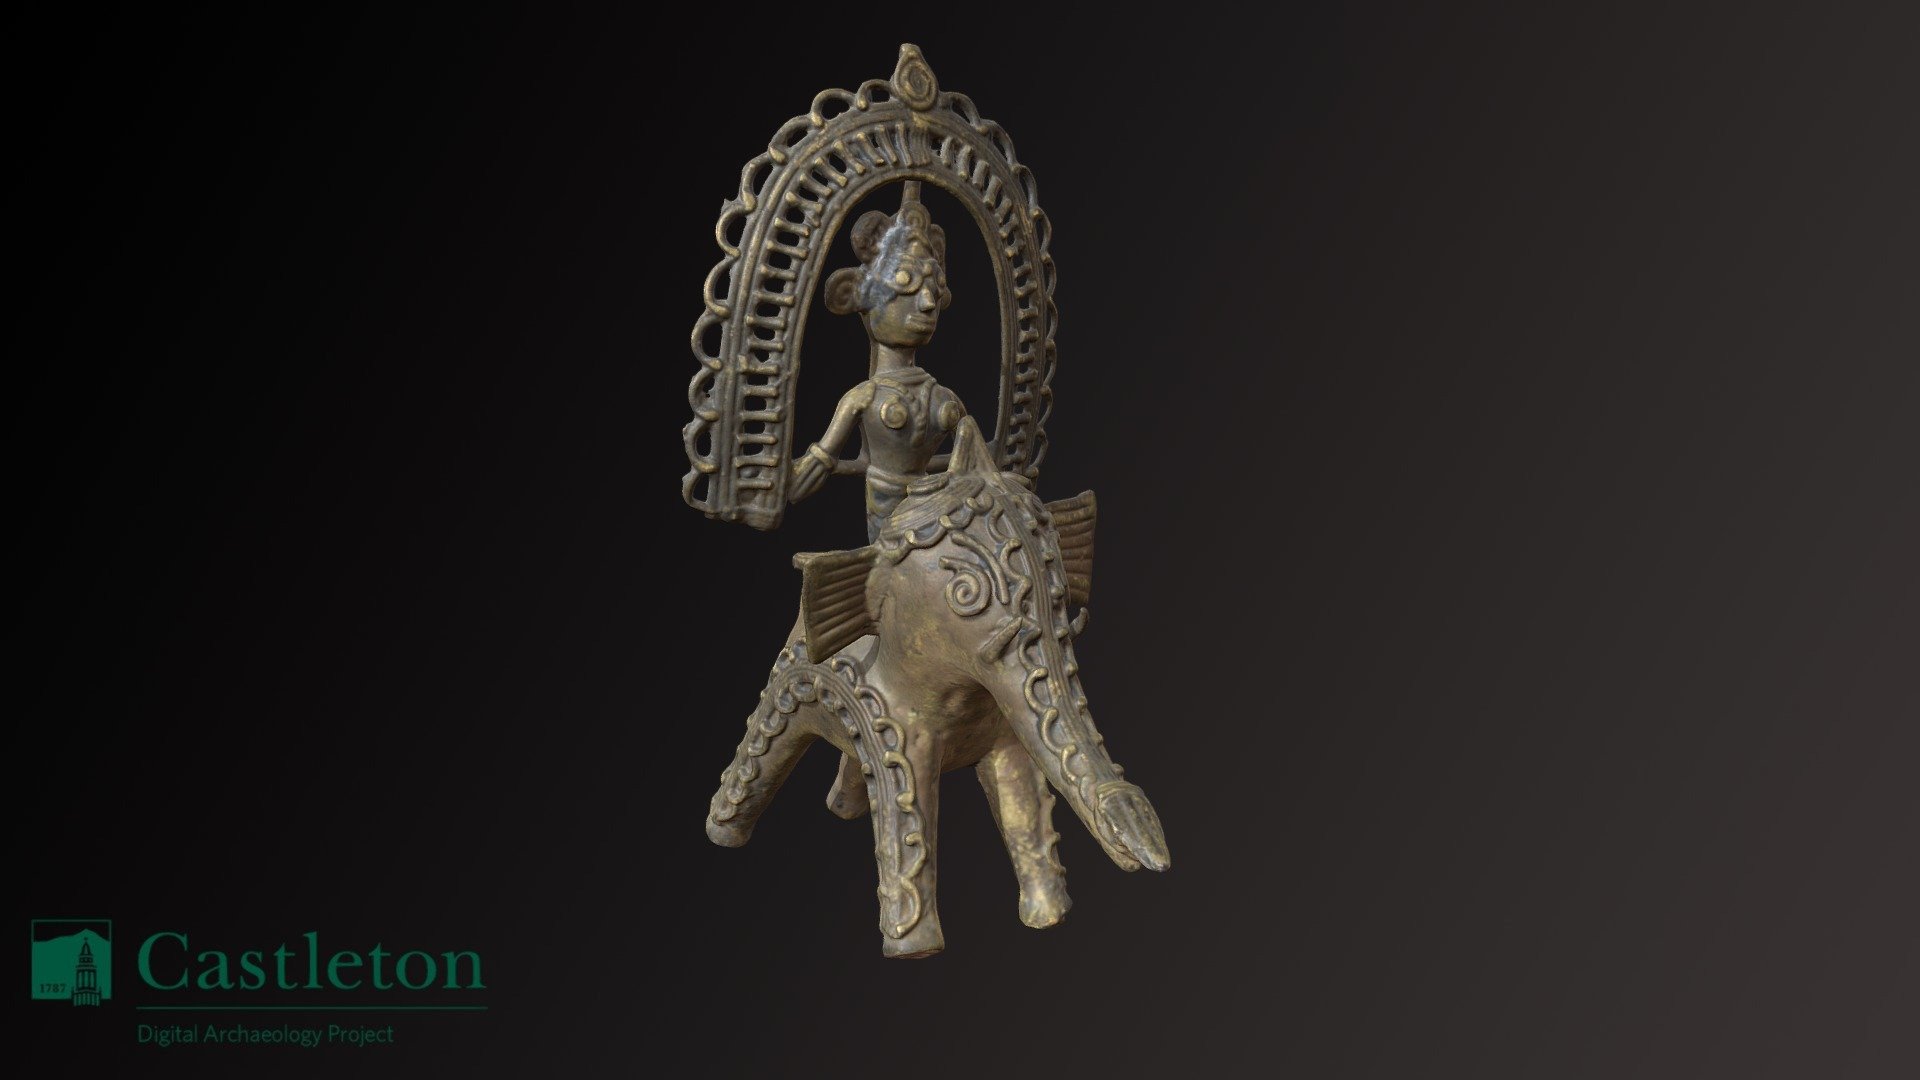 Brass votive figure of the Goddess Lakshmi on an elephant. Kolkata, India. From the Christine Price Collection (https://sketchfab.com/CUDAP/collections/christine-price-collection) at Castleton University (https://www.castleton.edu/news-media/article/the-beauty-of-simple-things/). Dimensions: TBA. Fully textured model. Scanned at Castleton University using Artec Space Spider 3d model